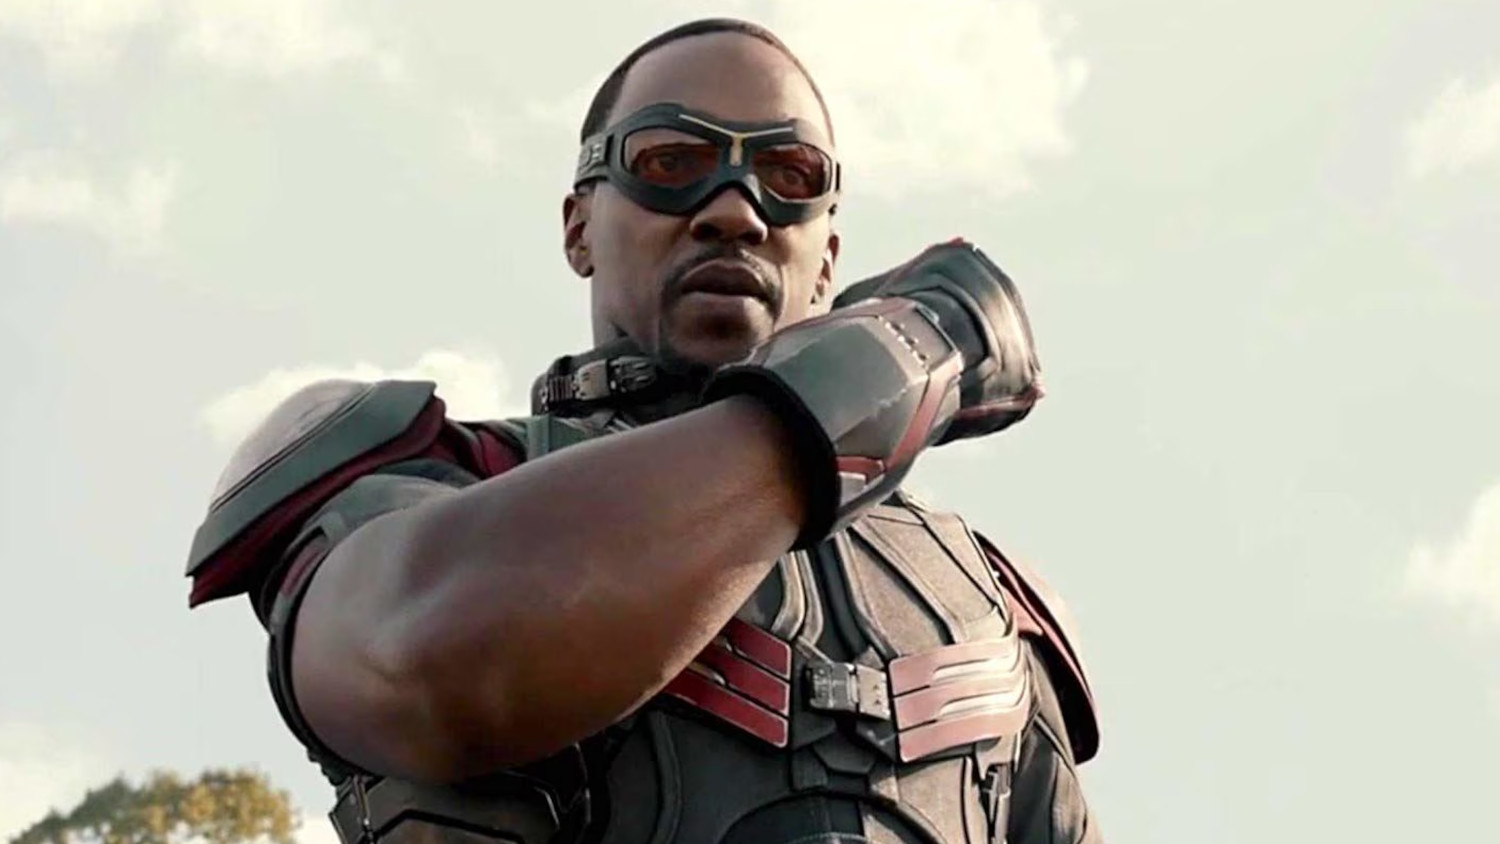 Anthony Mackie ‘Rudest Human Being Alive’ Claims Fan After Gas Station Incident